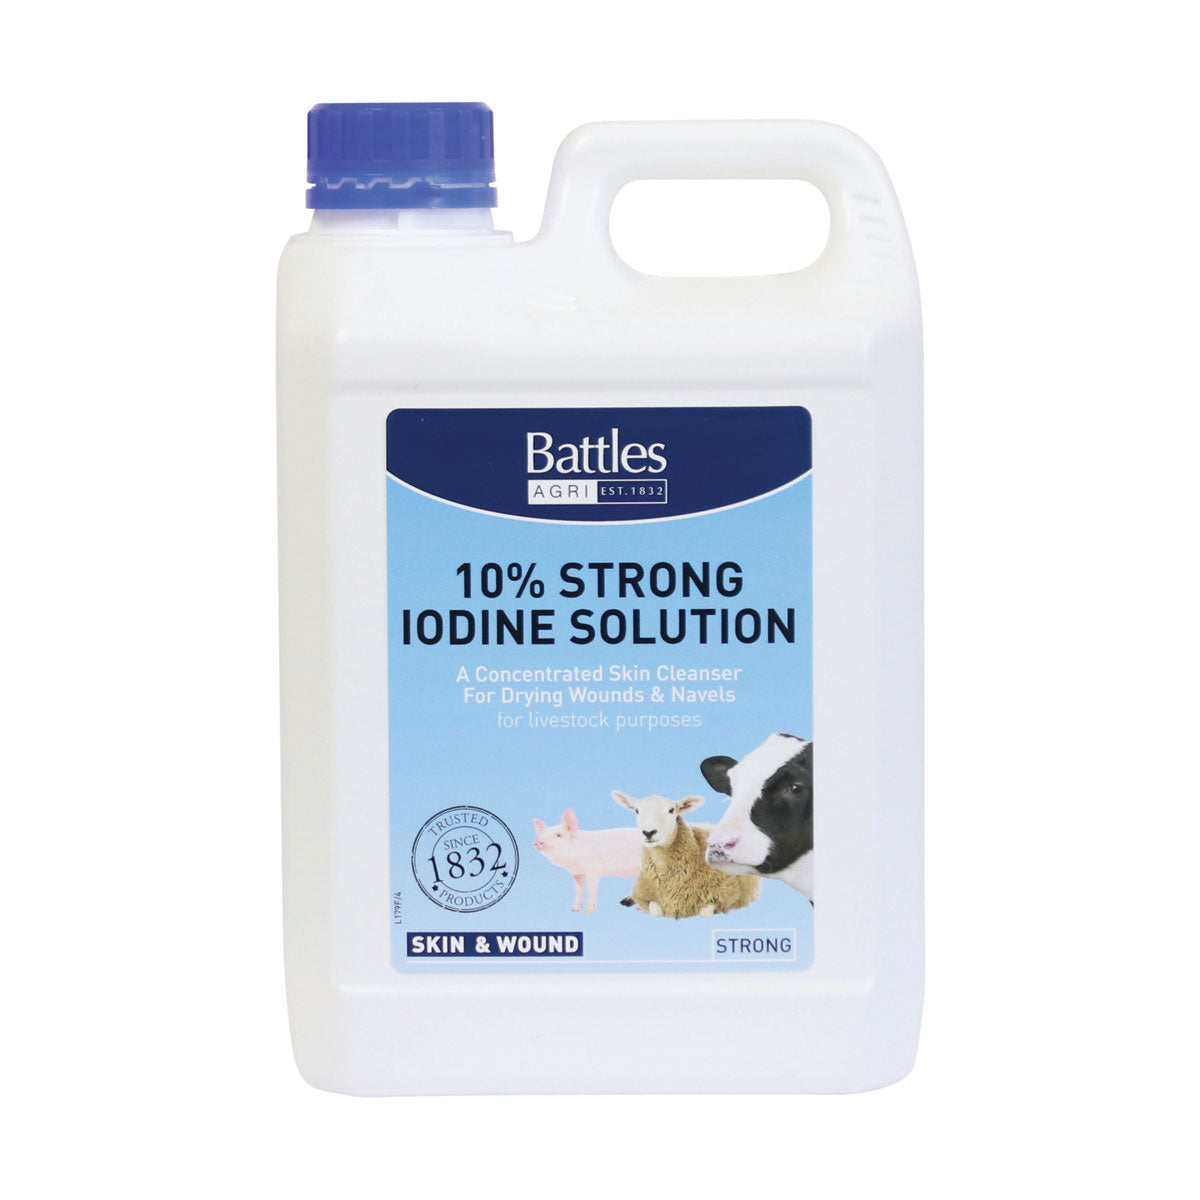 Battles 10% Strong Iodine Solution